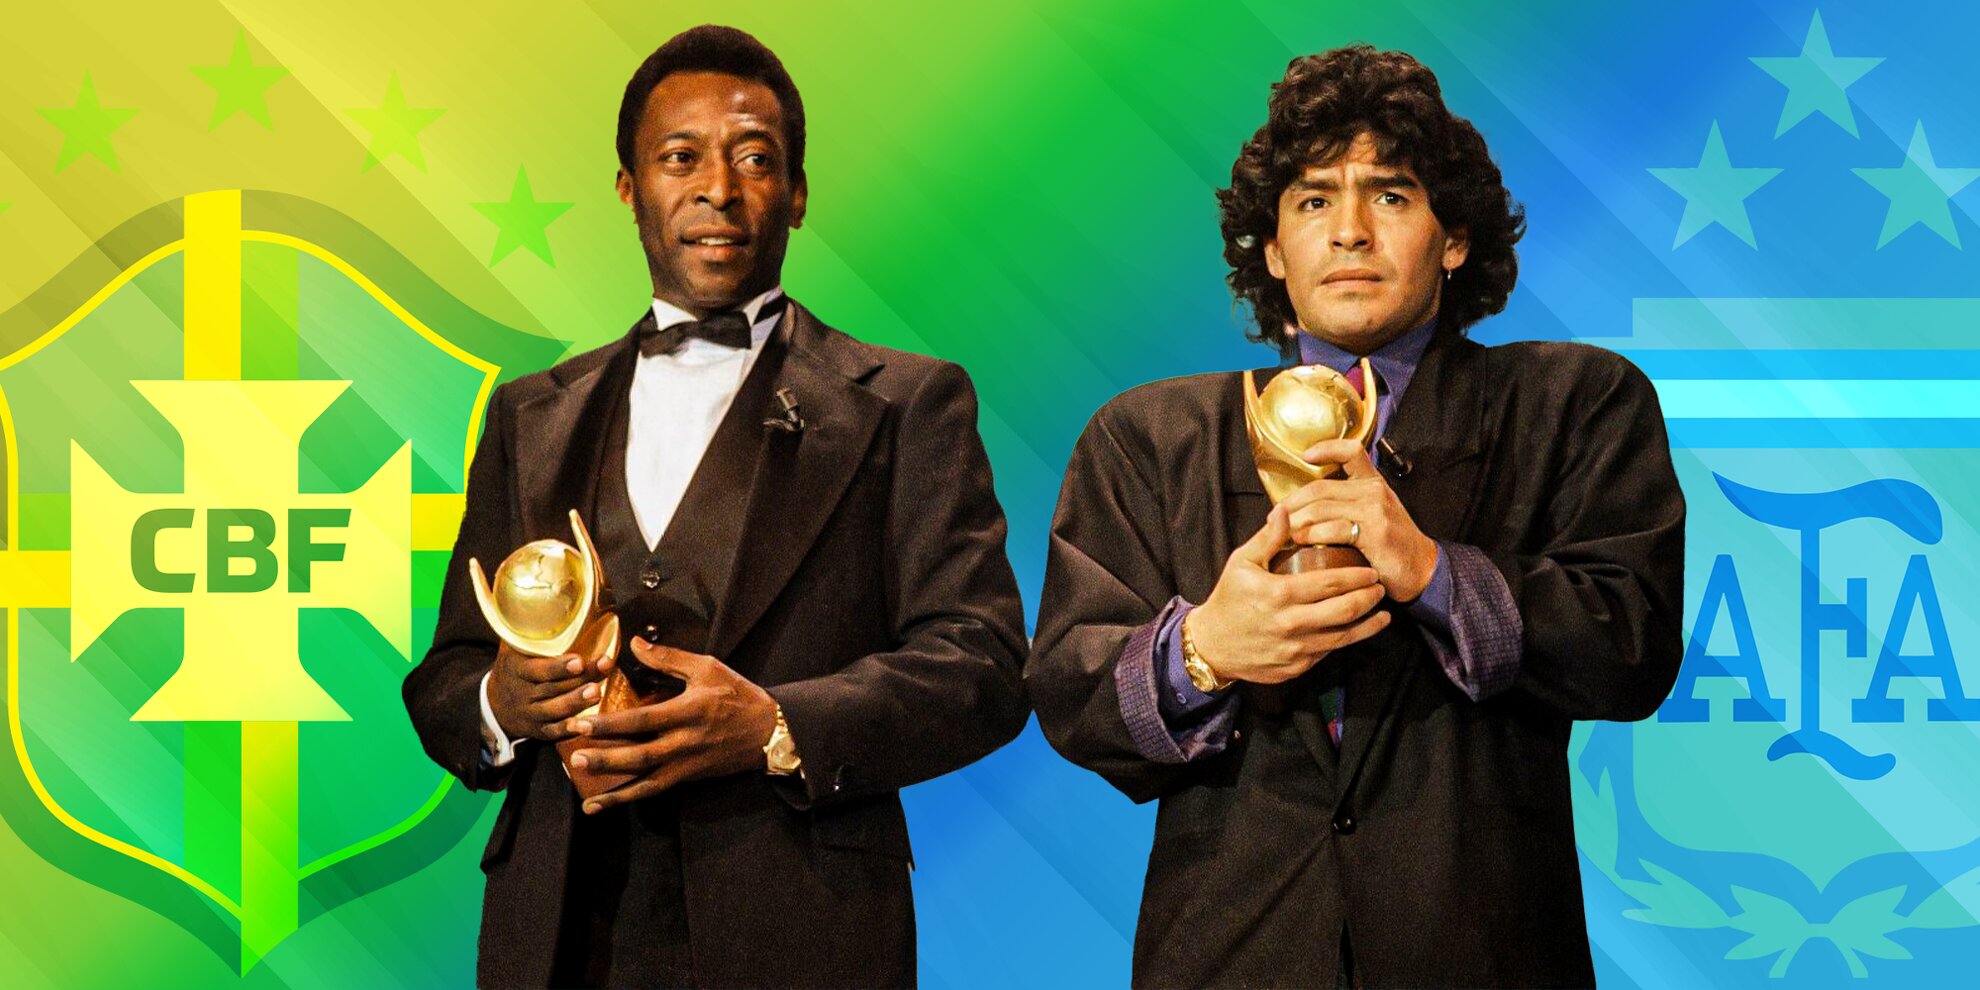 Pele vs Diego Maradona: Who has better stats in their career?